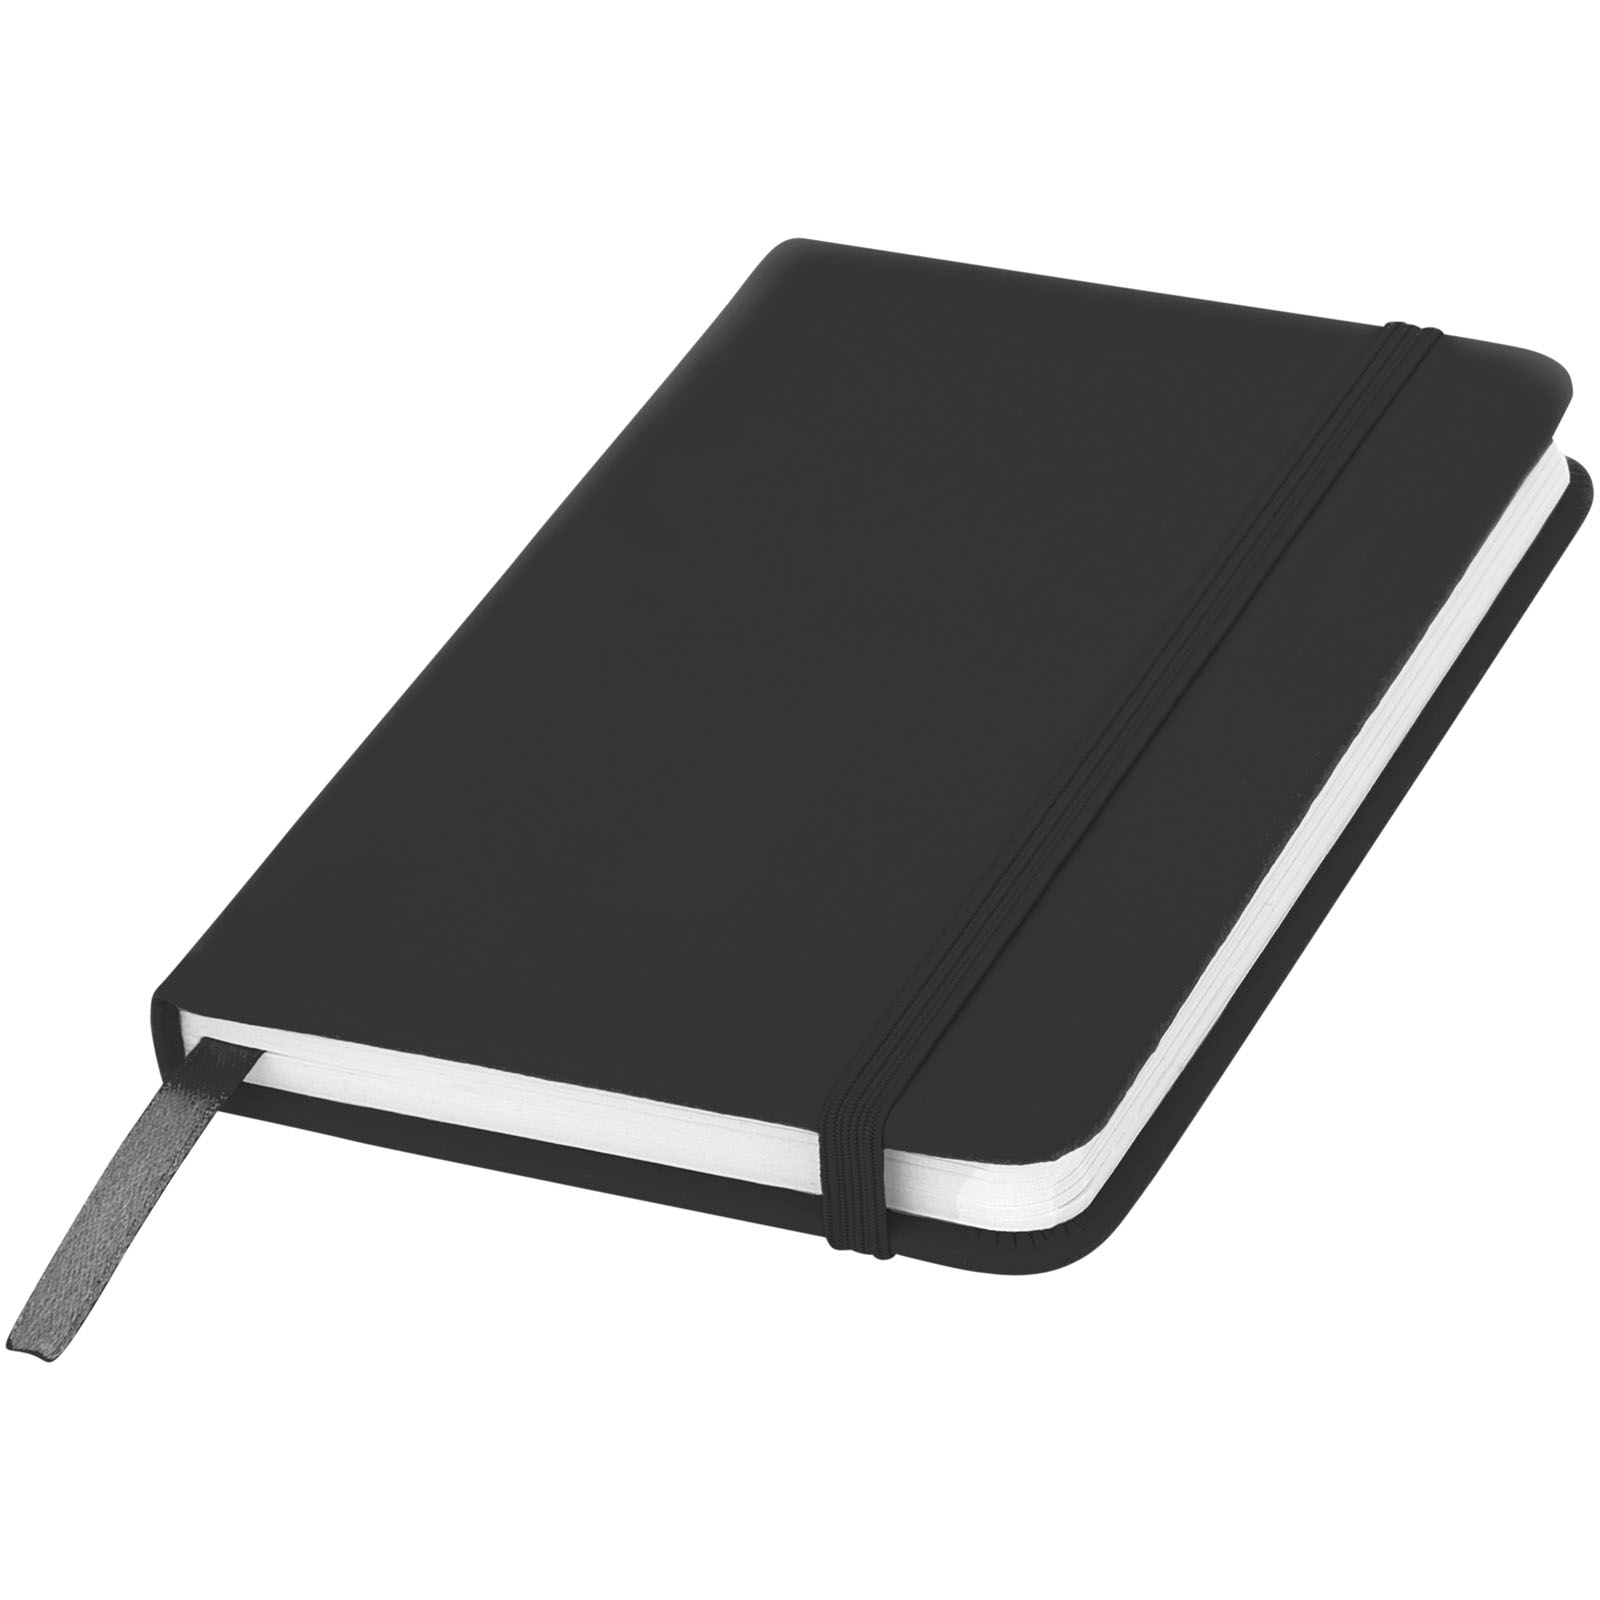 Advertising Hard cover notebooks - Spectrum A6 hard cover notebook